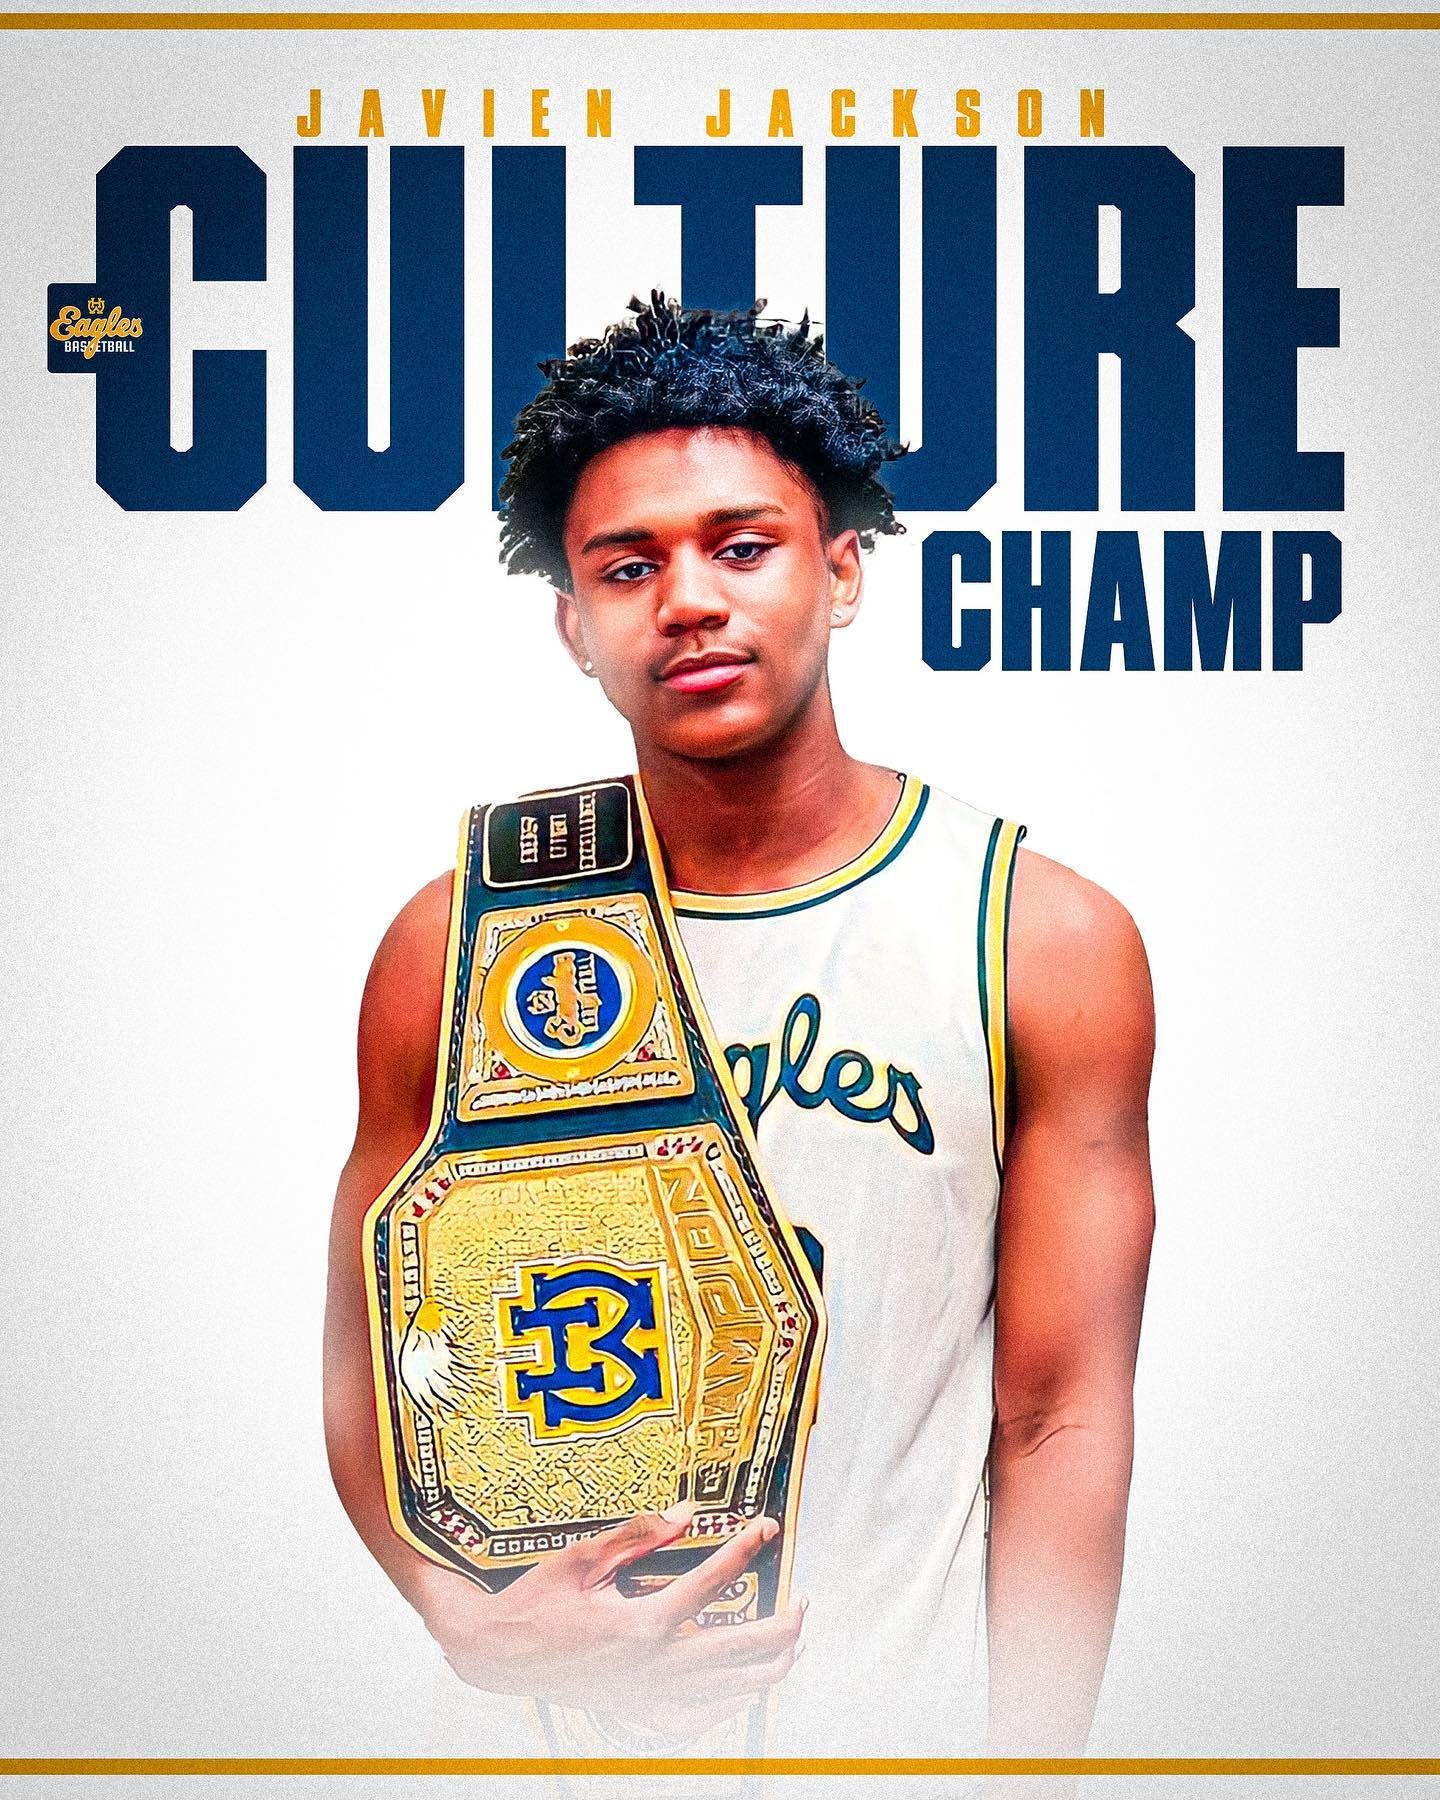 Our &lsquo;23/&lsquo;24 Season Culture Champ is no other than our guy Javien Jackson. One of the best rebounders the school has seen. Led us in rebounds being only 6&rsquo;2 but also led us in Field Goal %. He represented who we are and who we needed